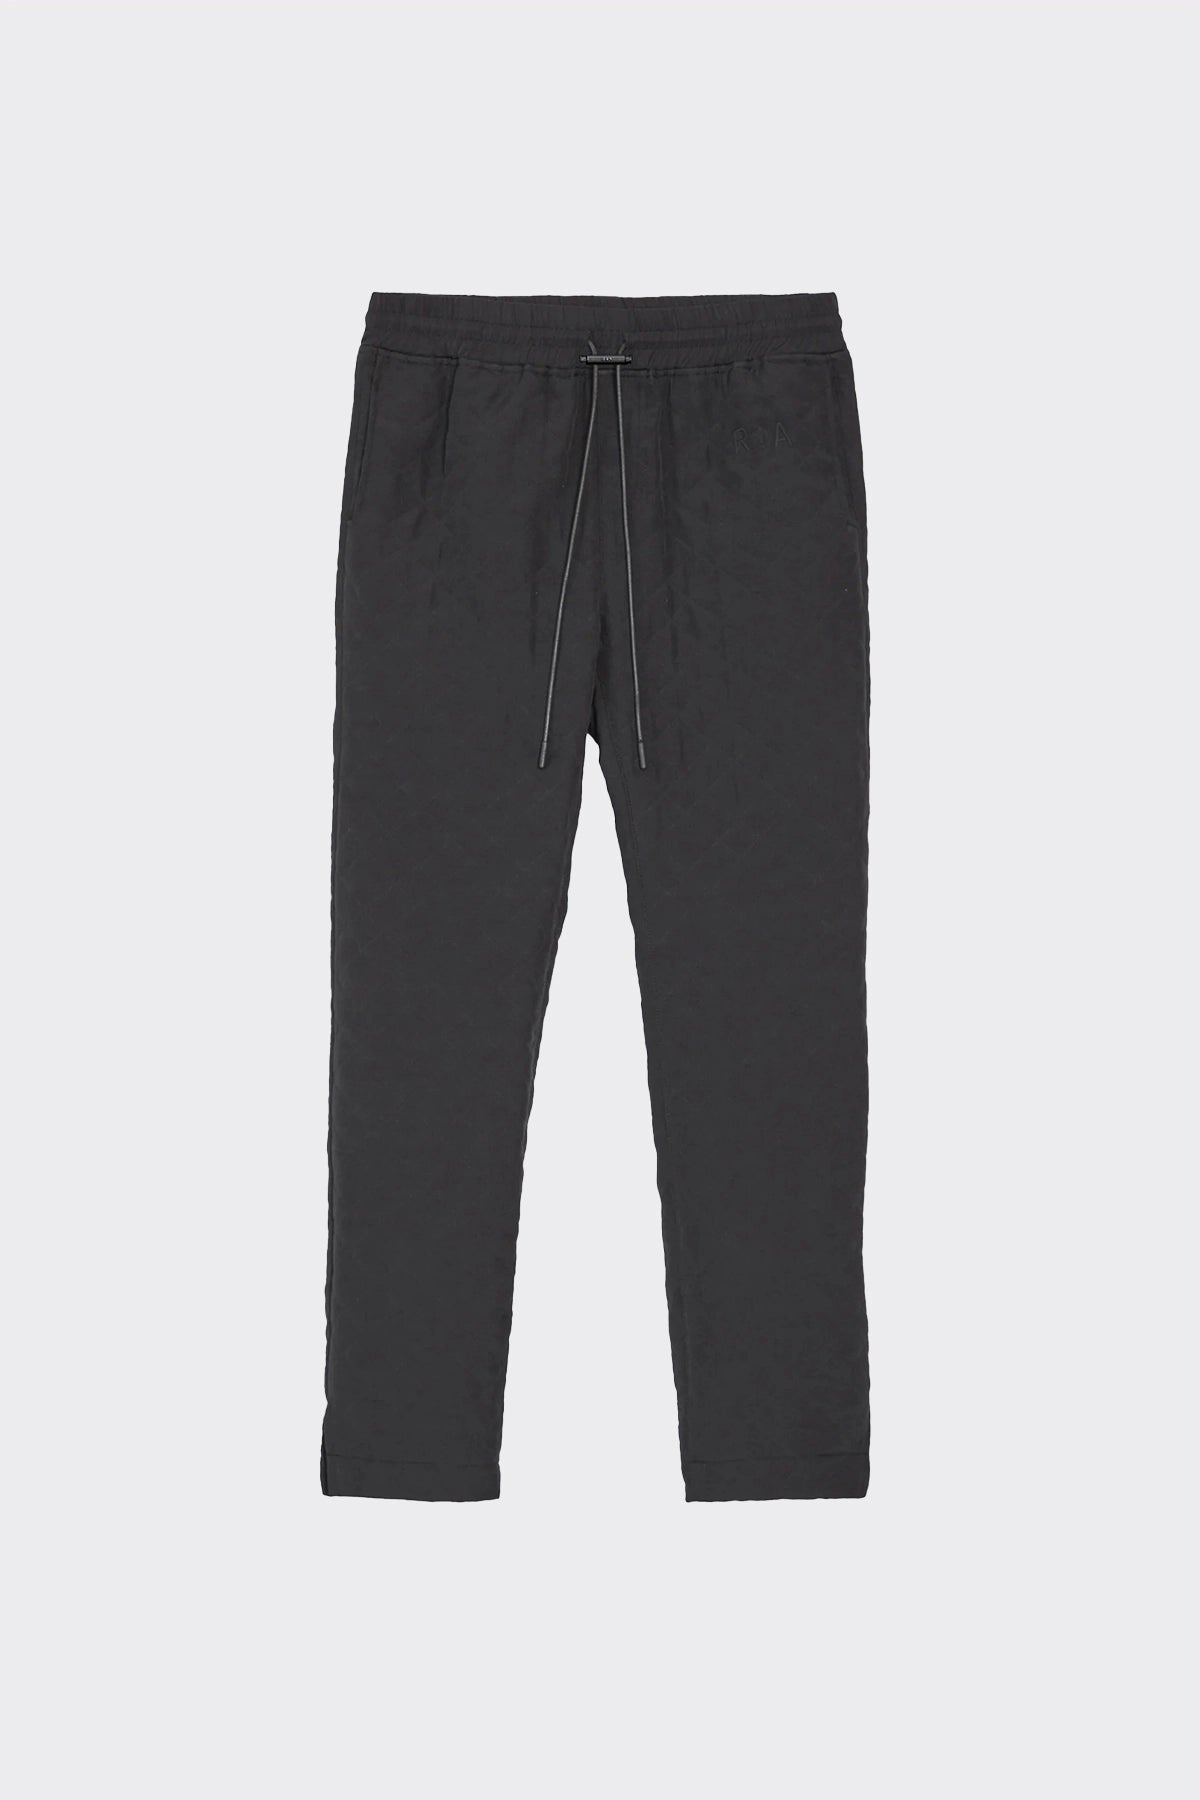 BENTO PANT | BLACK QUILTED